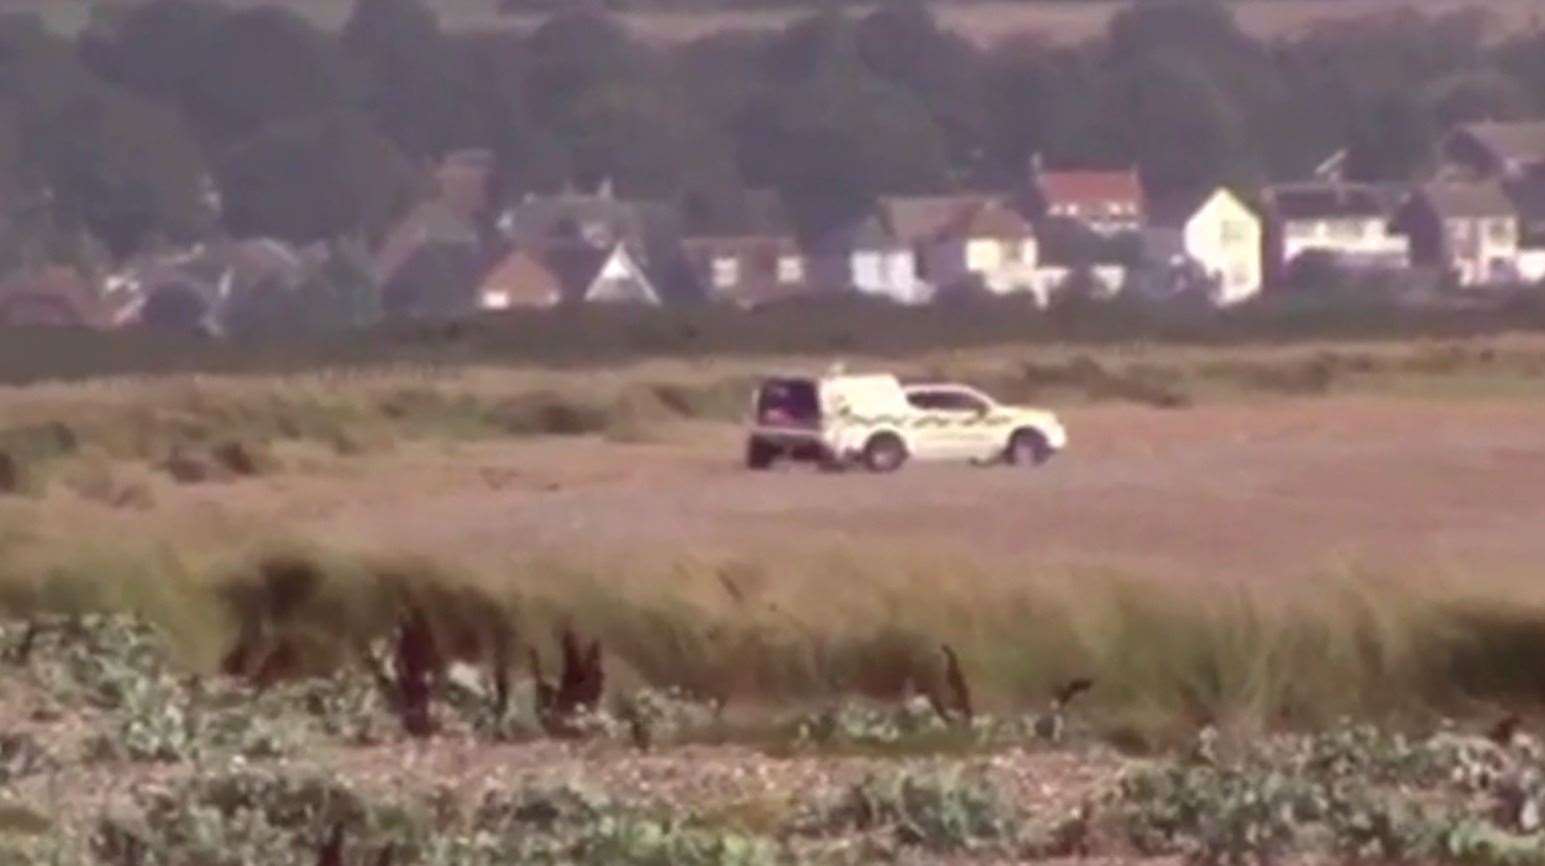 Footage shows a bomb disposal unit vehicle parked on the beach. Picture from video by Chris Johnson